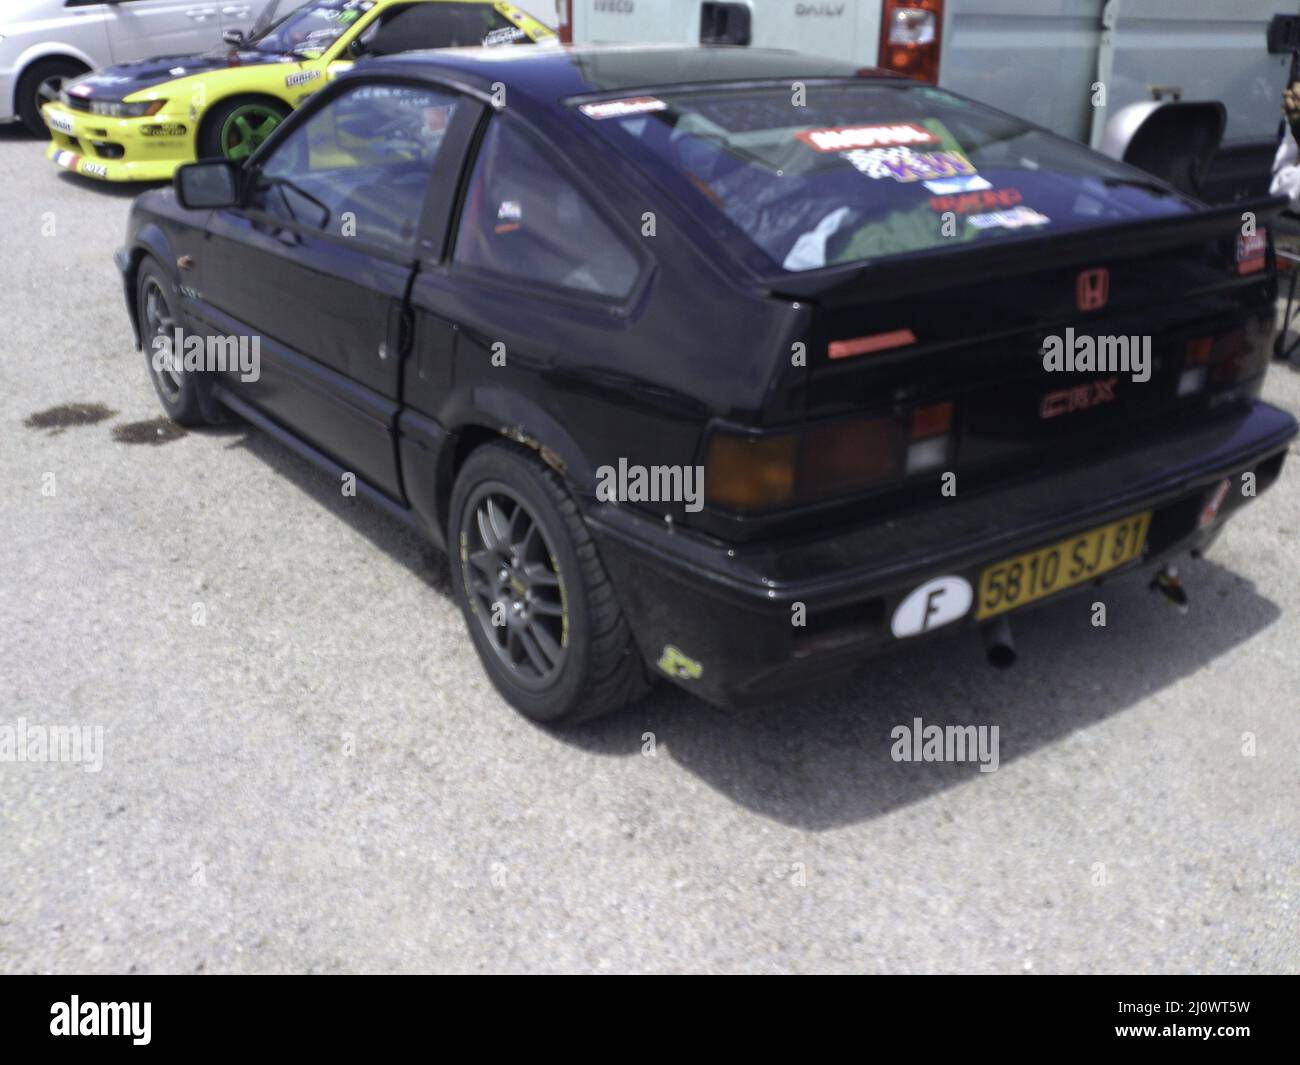 HONDA CR-X crx-vtec-ee8-ancetre Used - the parking